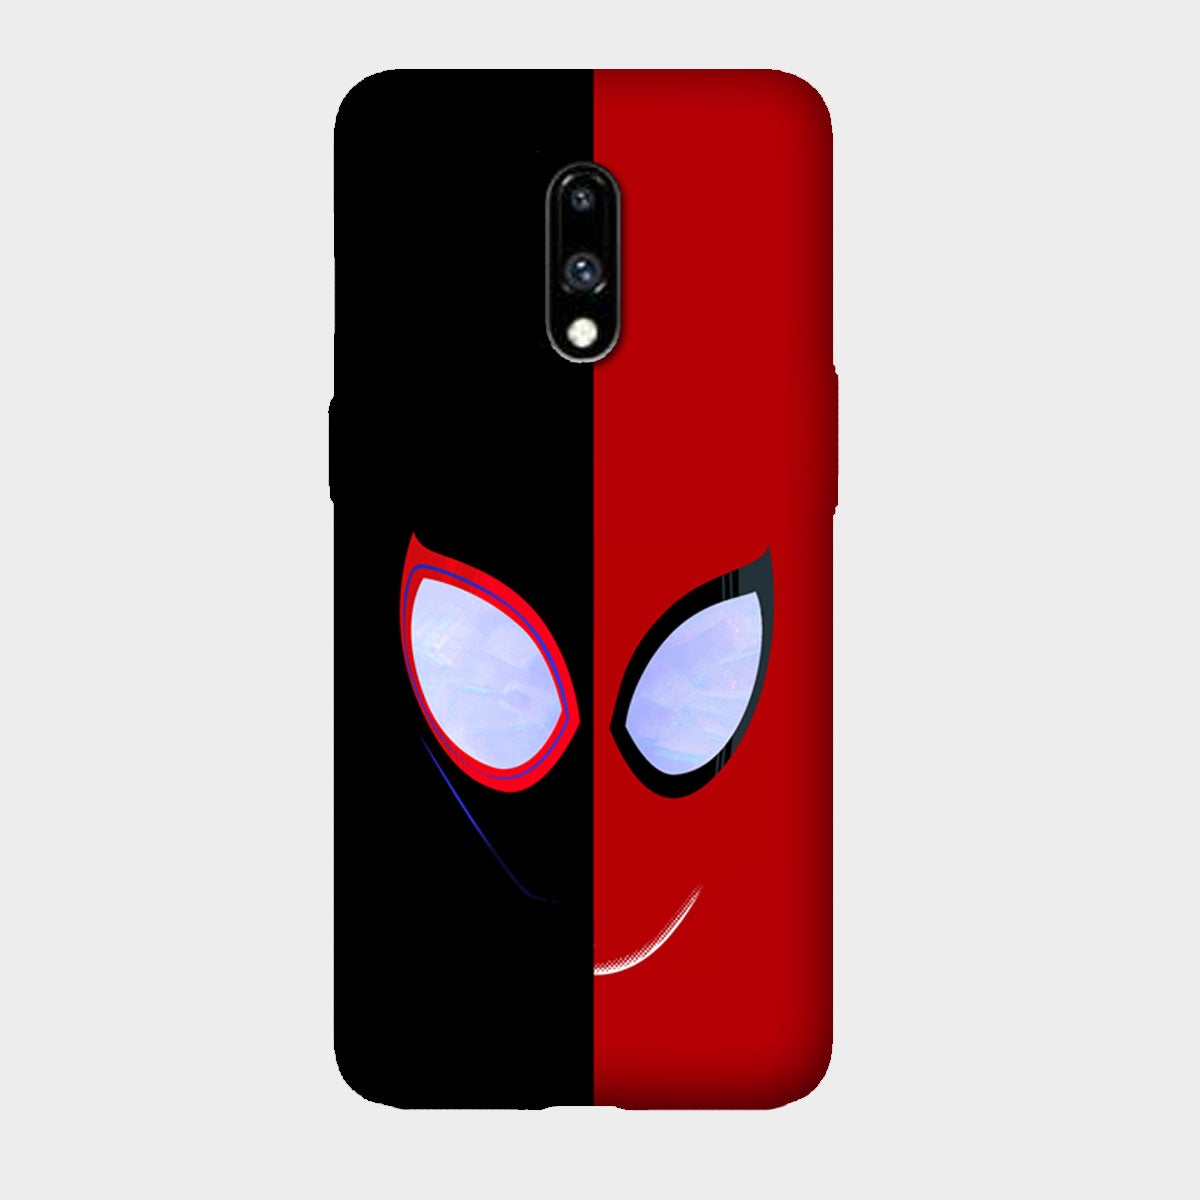 Spider Man - Black & Red - Mobile Phone Cover - Hard Case - OnePlus